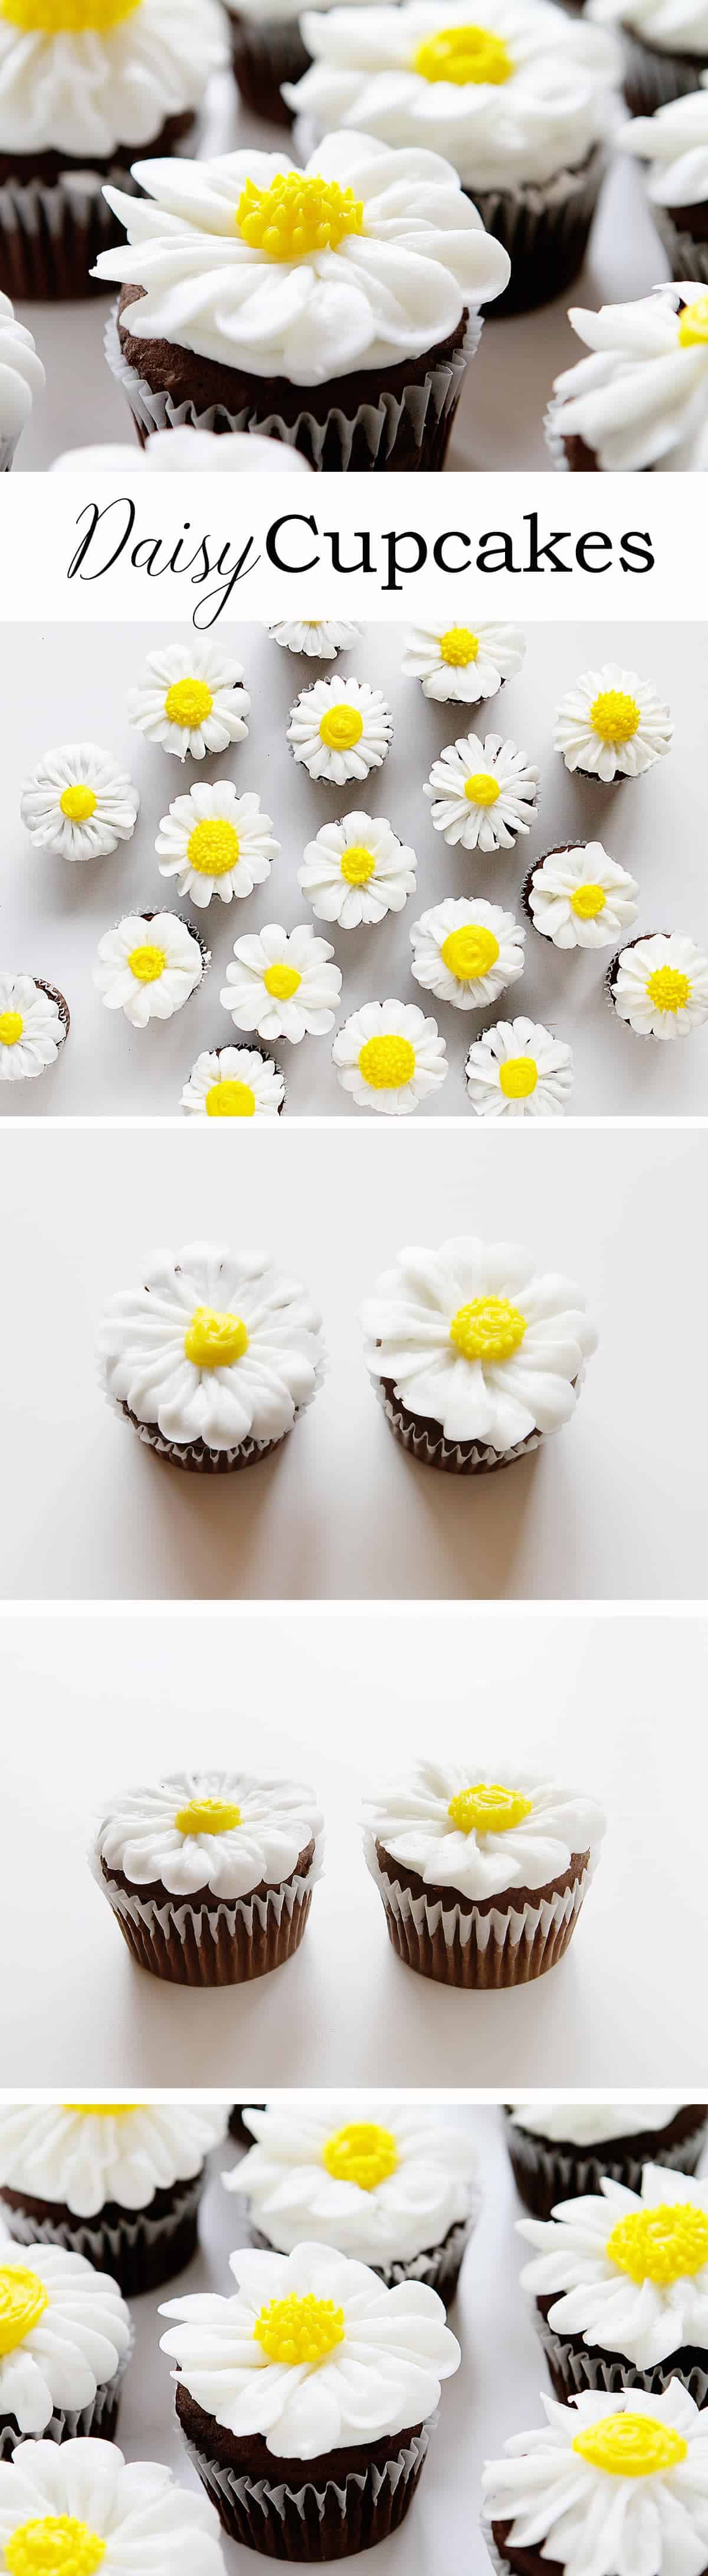 Genius tips and tricks help to make this the EASIEST cupcake ever!